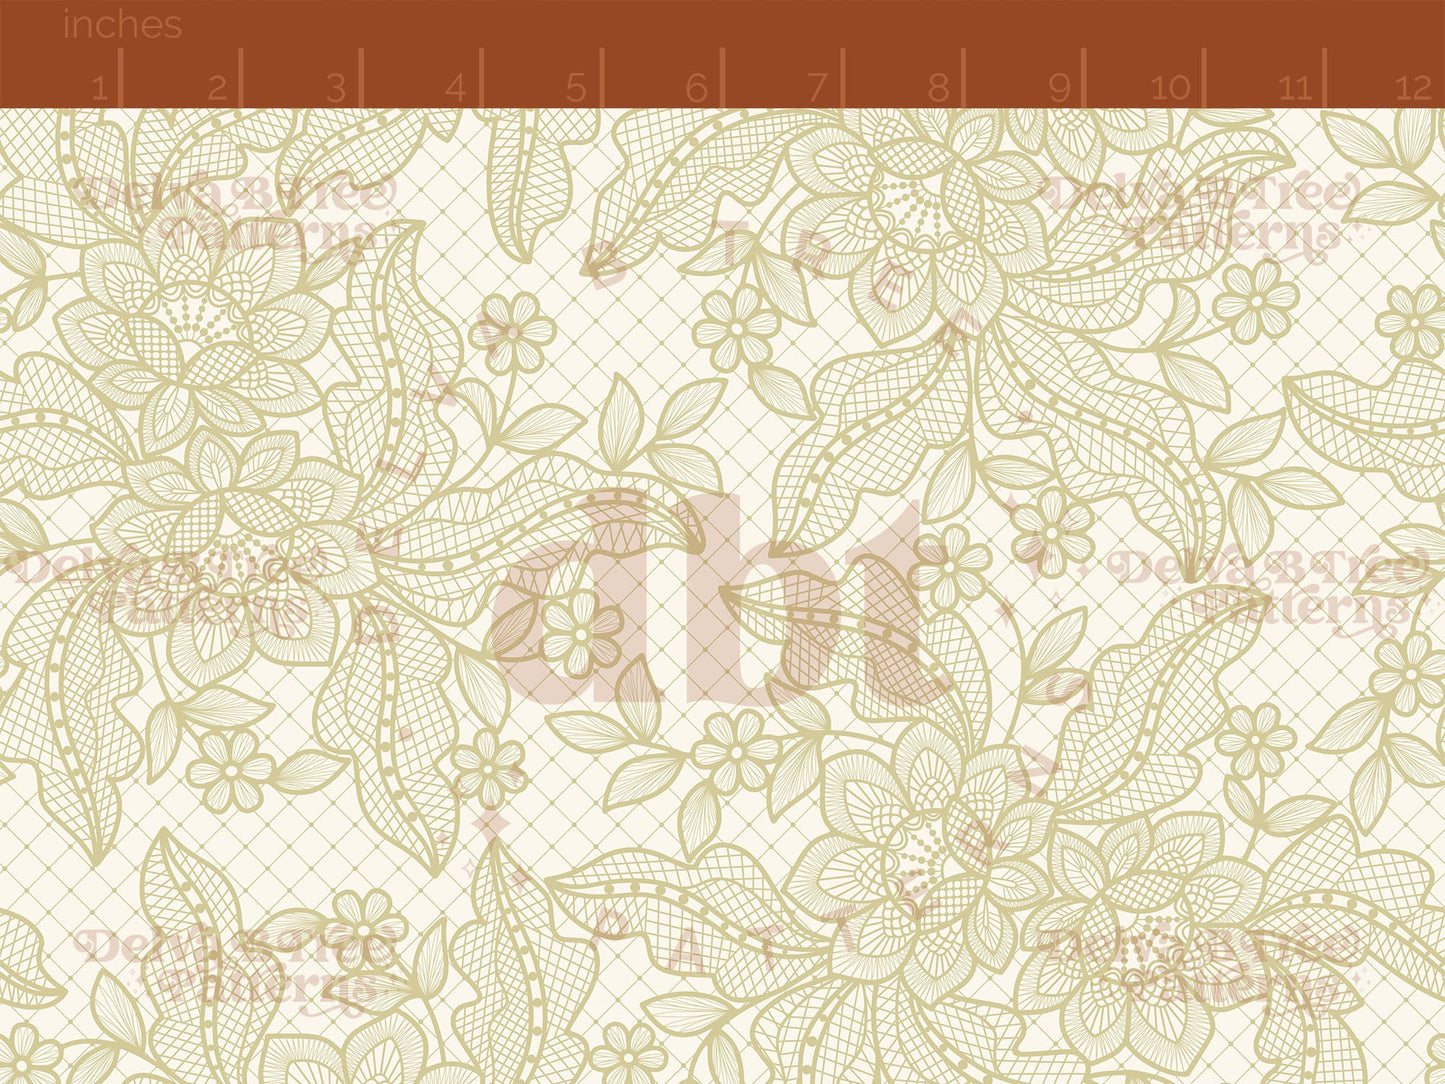 Dusty Yellow flowers, leaves and faux lace netting on an off white / ivory / cream background seamless pattern scale digital file for small shops that make handmade products in small batches.